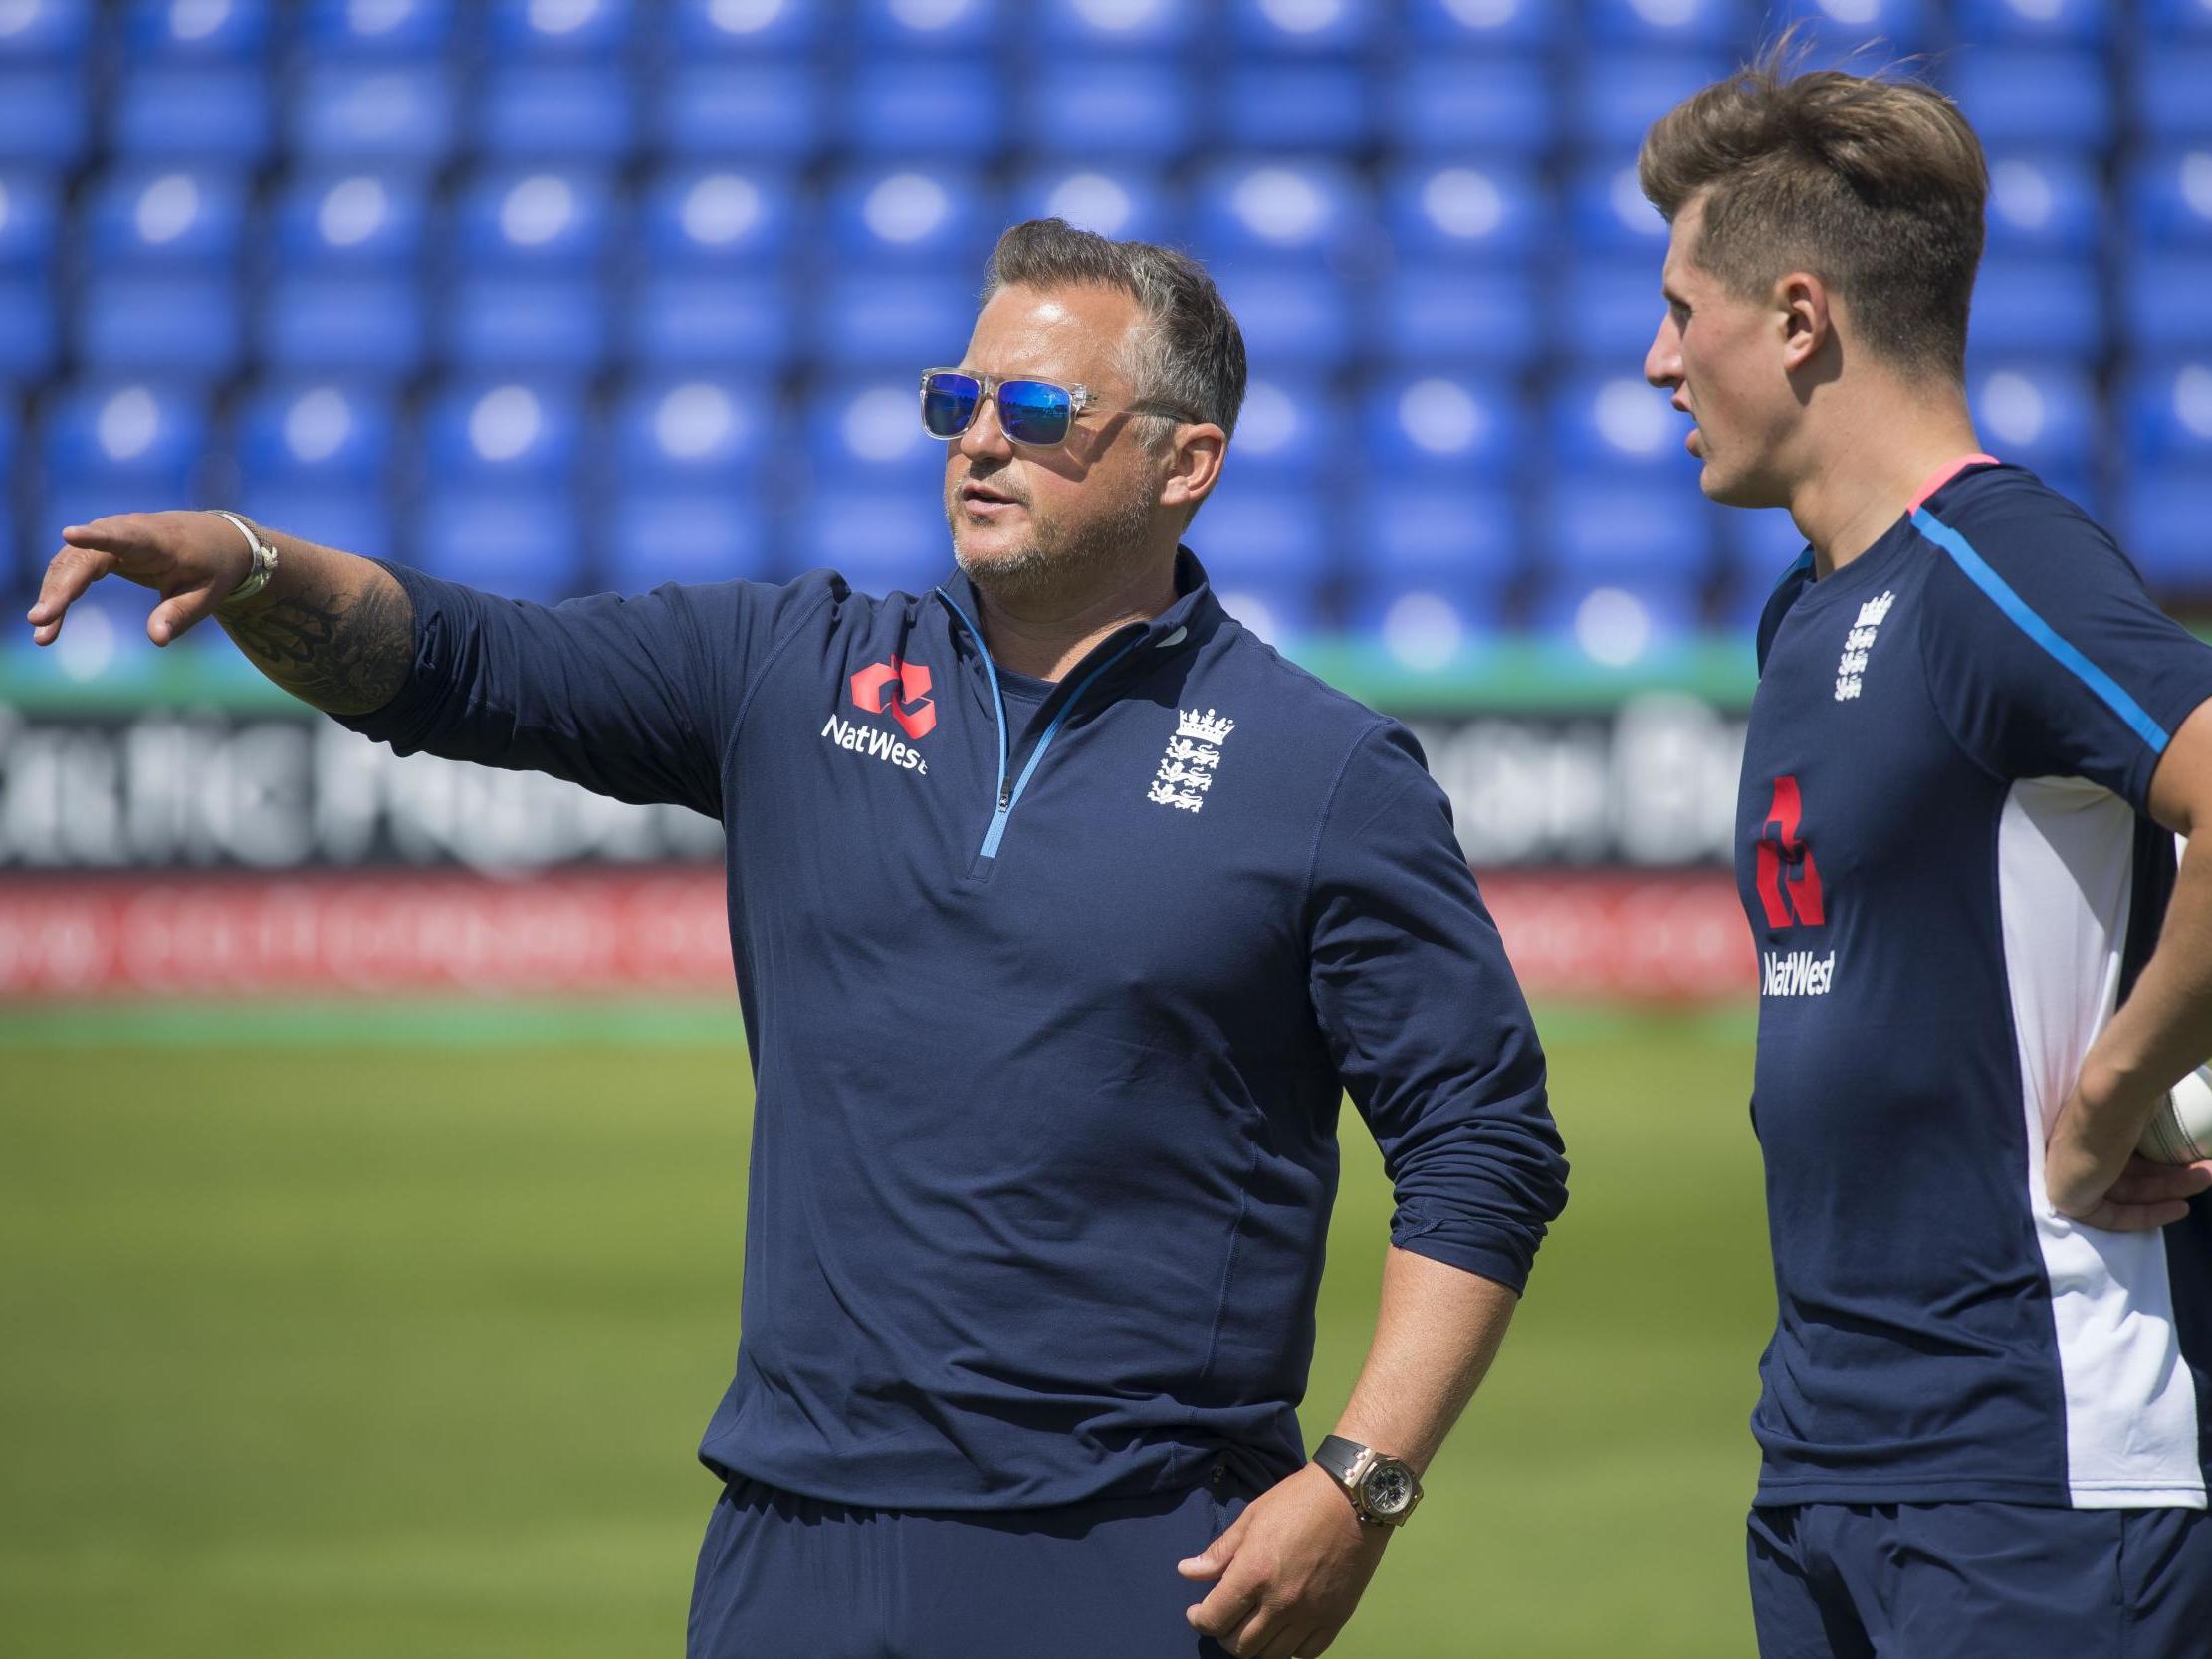 Darren Gough appointed England's fast bowling consultant ahead of New Zealand Test matches